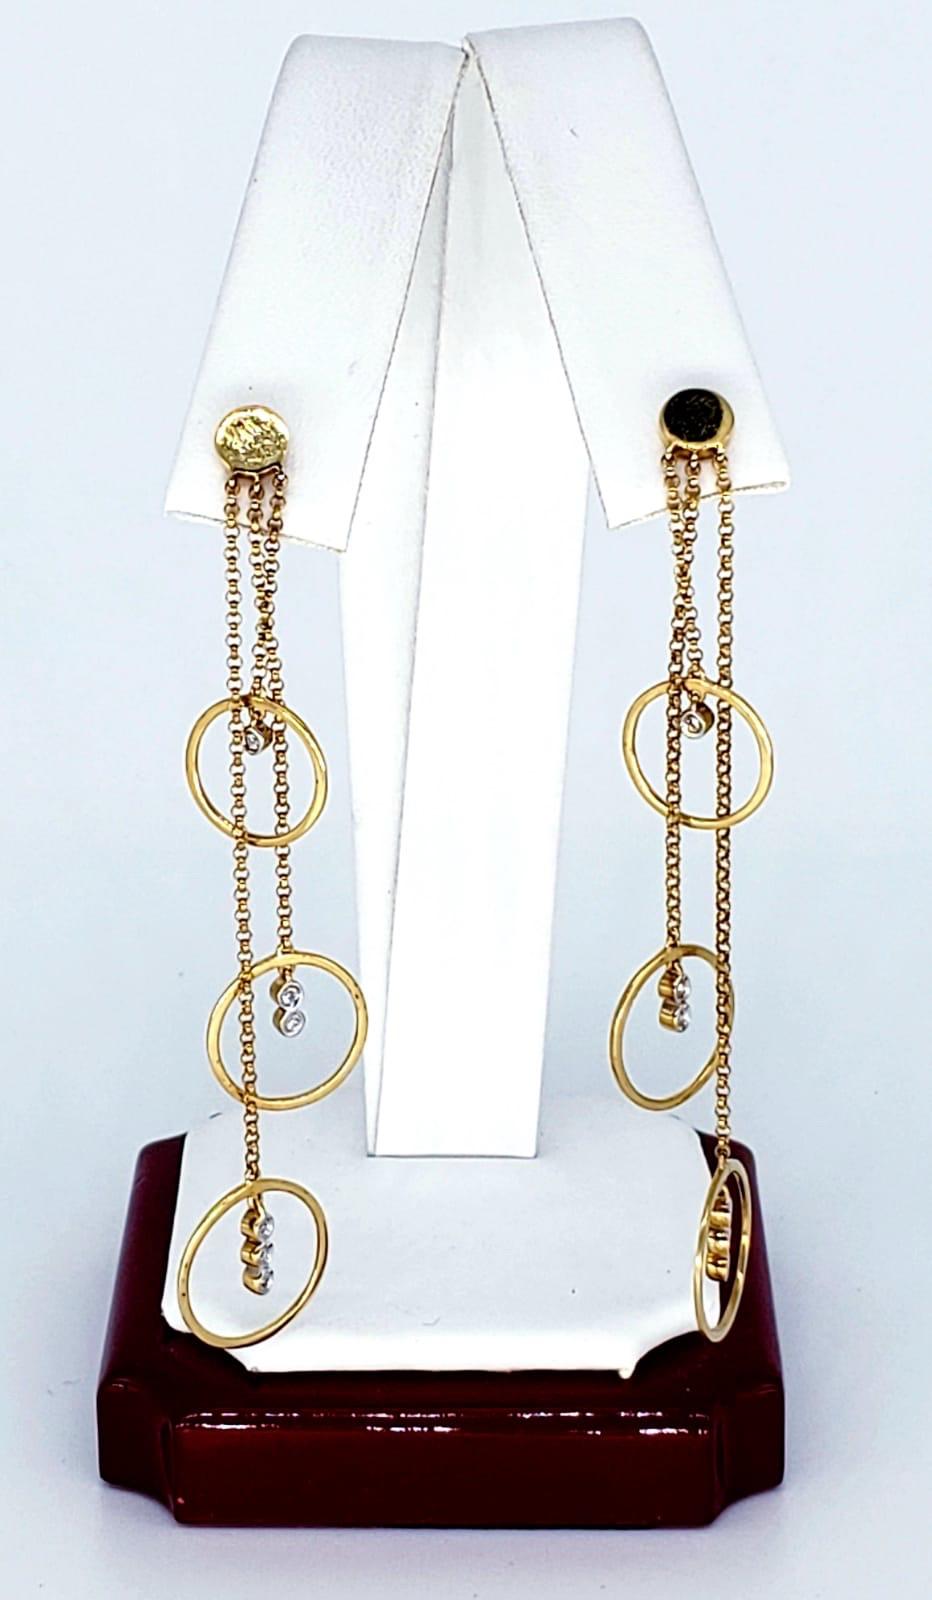 Vintage 0.24 Carat Diamond Dangling Hoop Design 14k Gold Earrings. The earrings feature 12 diamonds in total weighting approx 0.24 carats. The earrings are made from 14k solid gold & measure 11mm X 65mm and weights 3.5 grams 14k gold. Beautiful